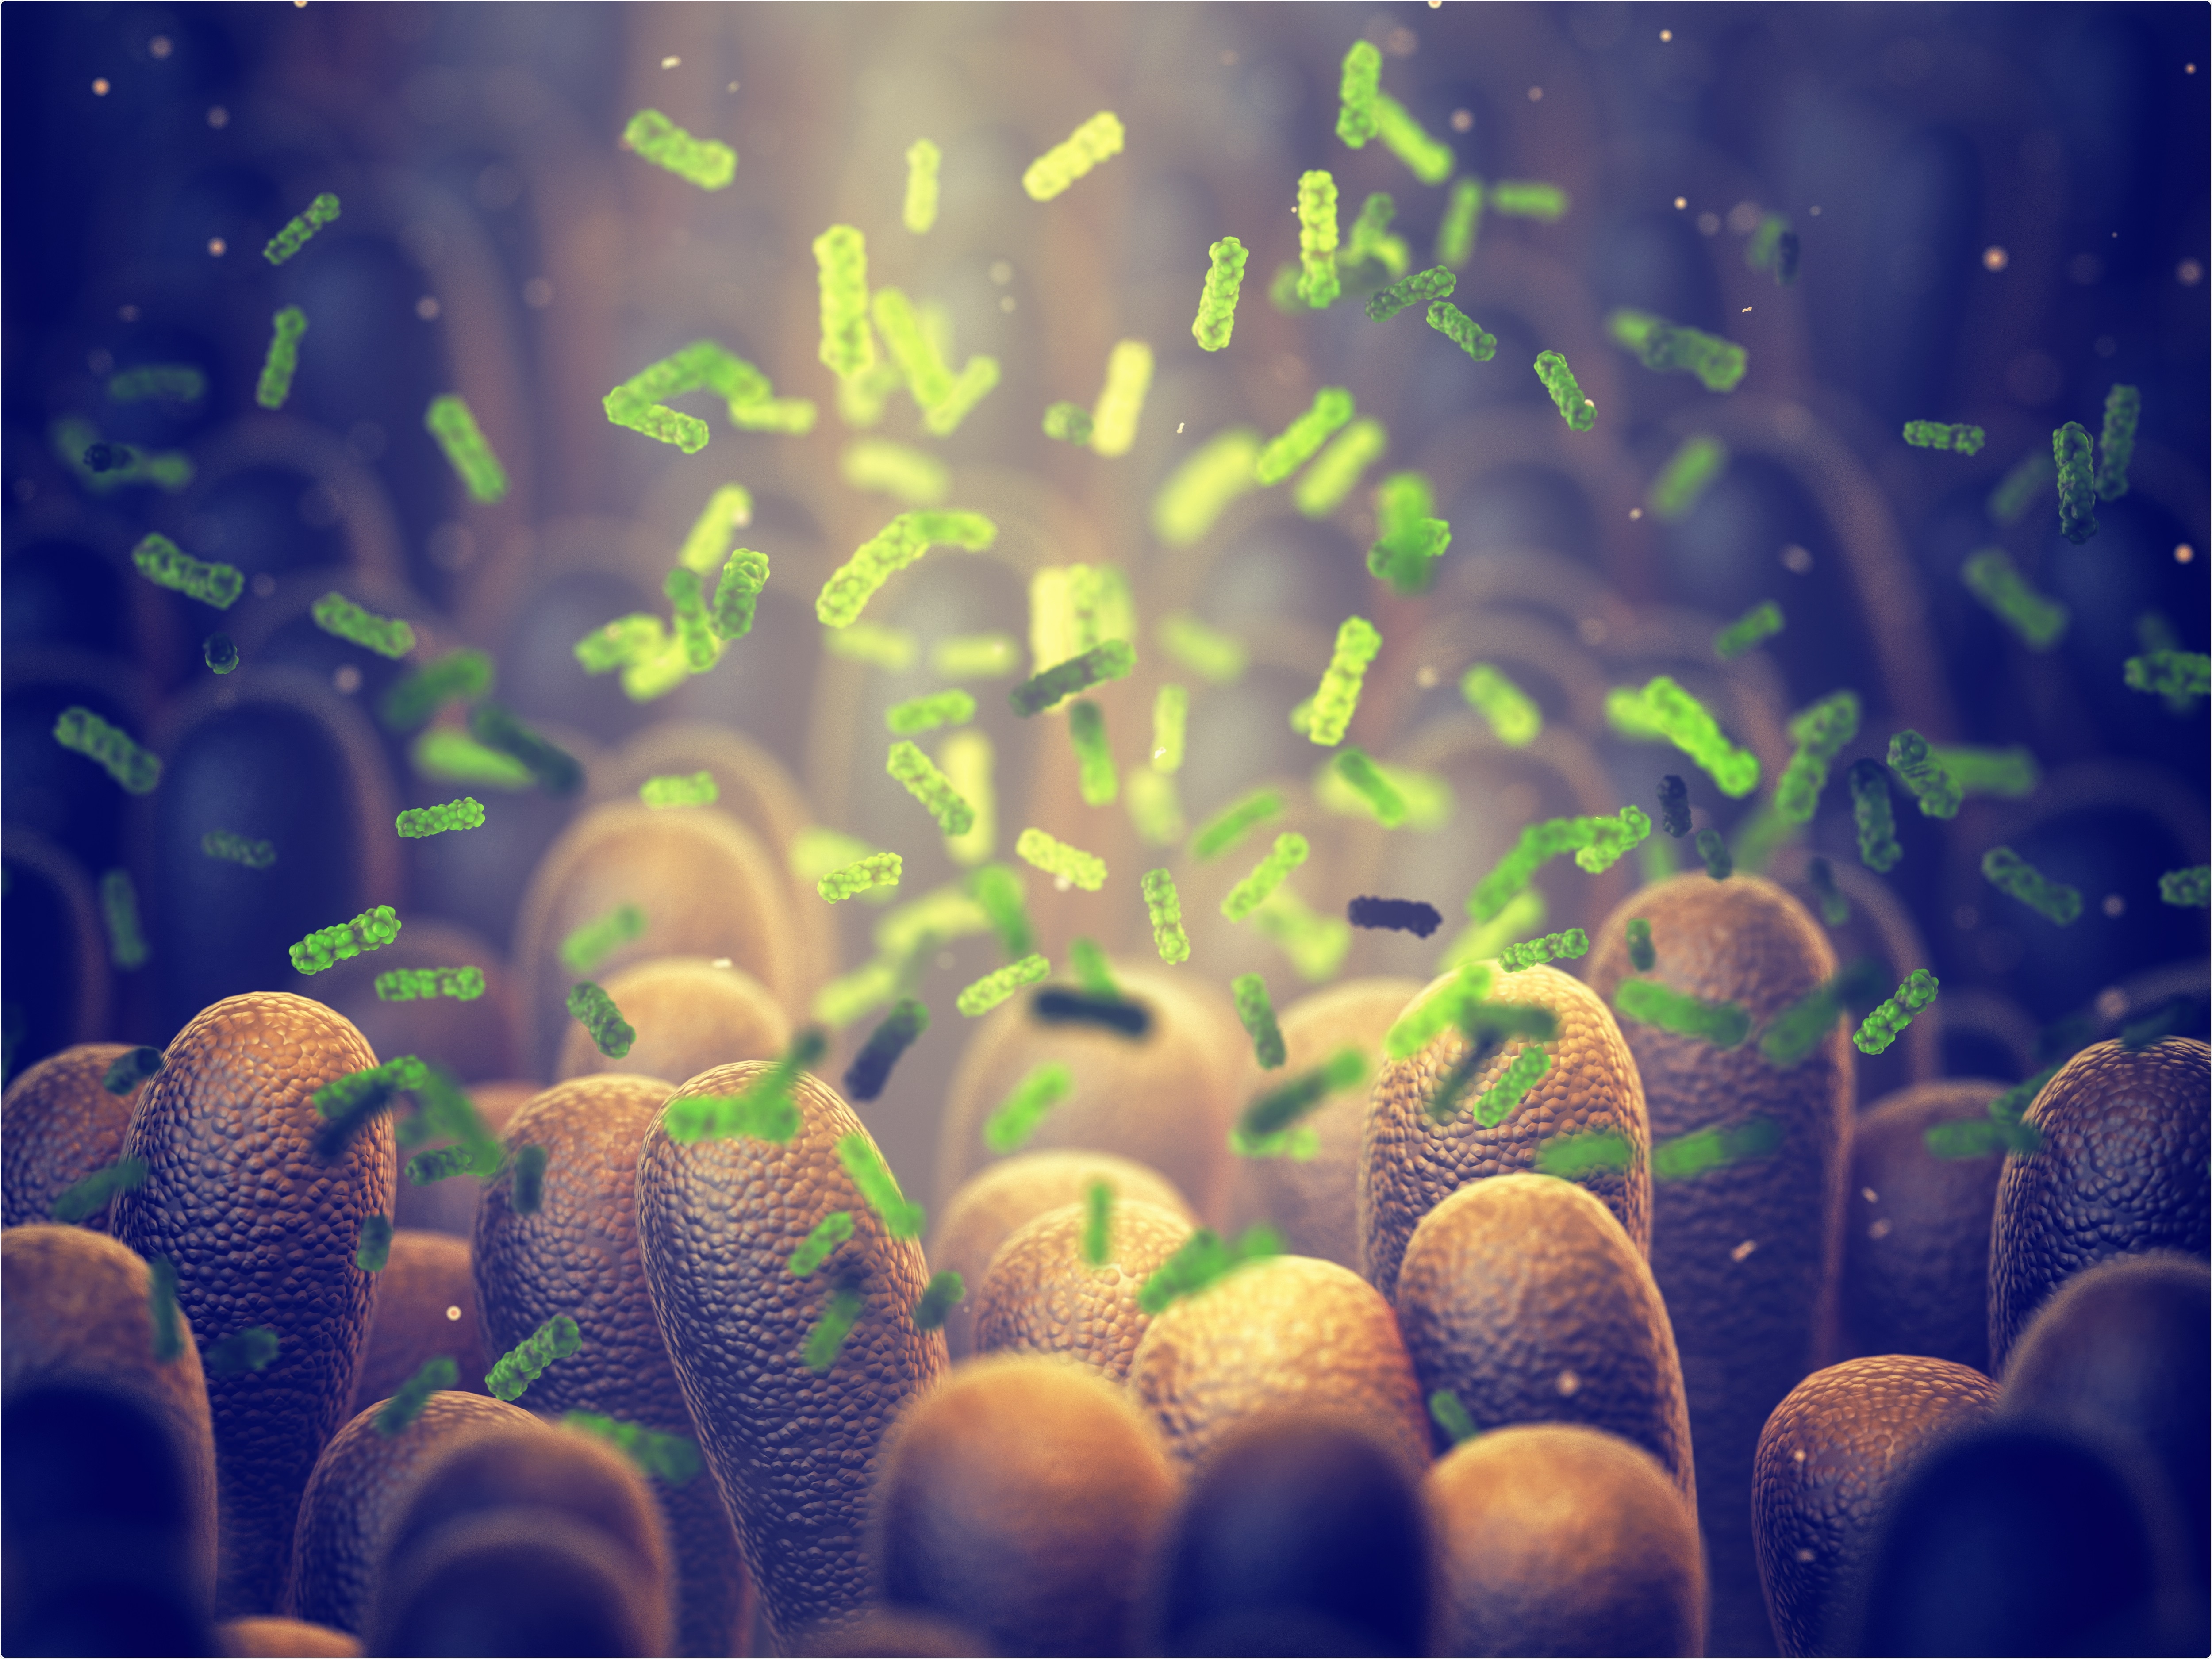 Study: Excessive inflammatory and metabolic responses to acute SARS-CoV-2 infection are associated with a distinct gut microbiota composition. Image Credit: Nobeastsofierce / Shutterstock